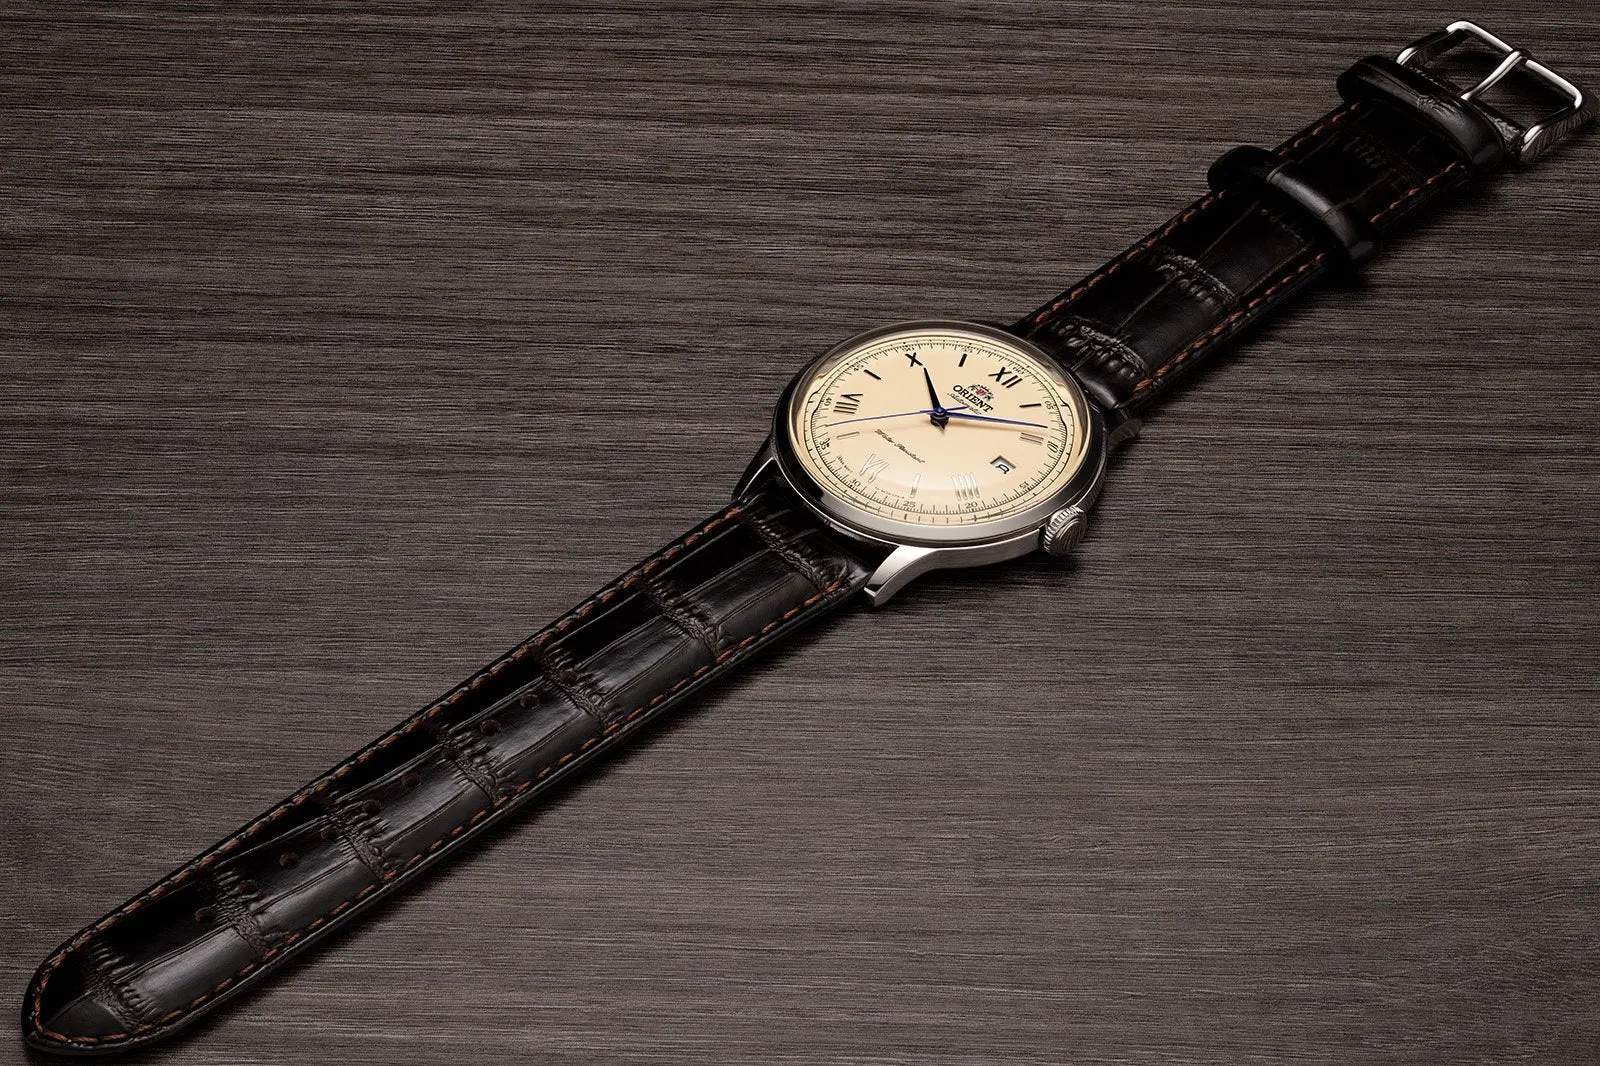 Orient Bambino Version 2 watch face slanted view zoom